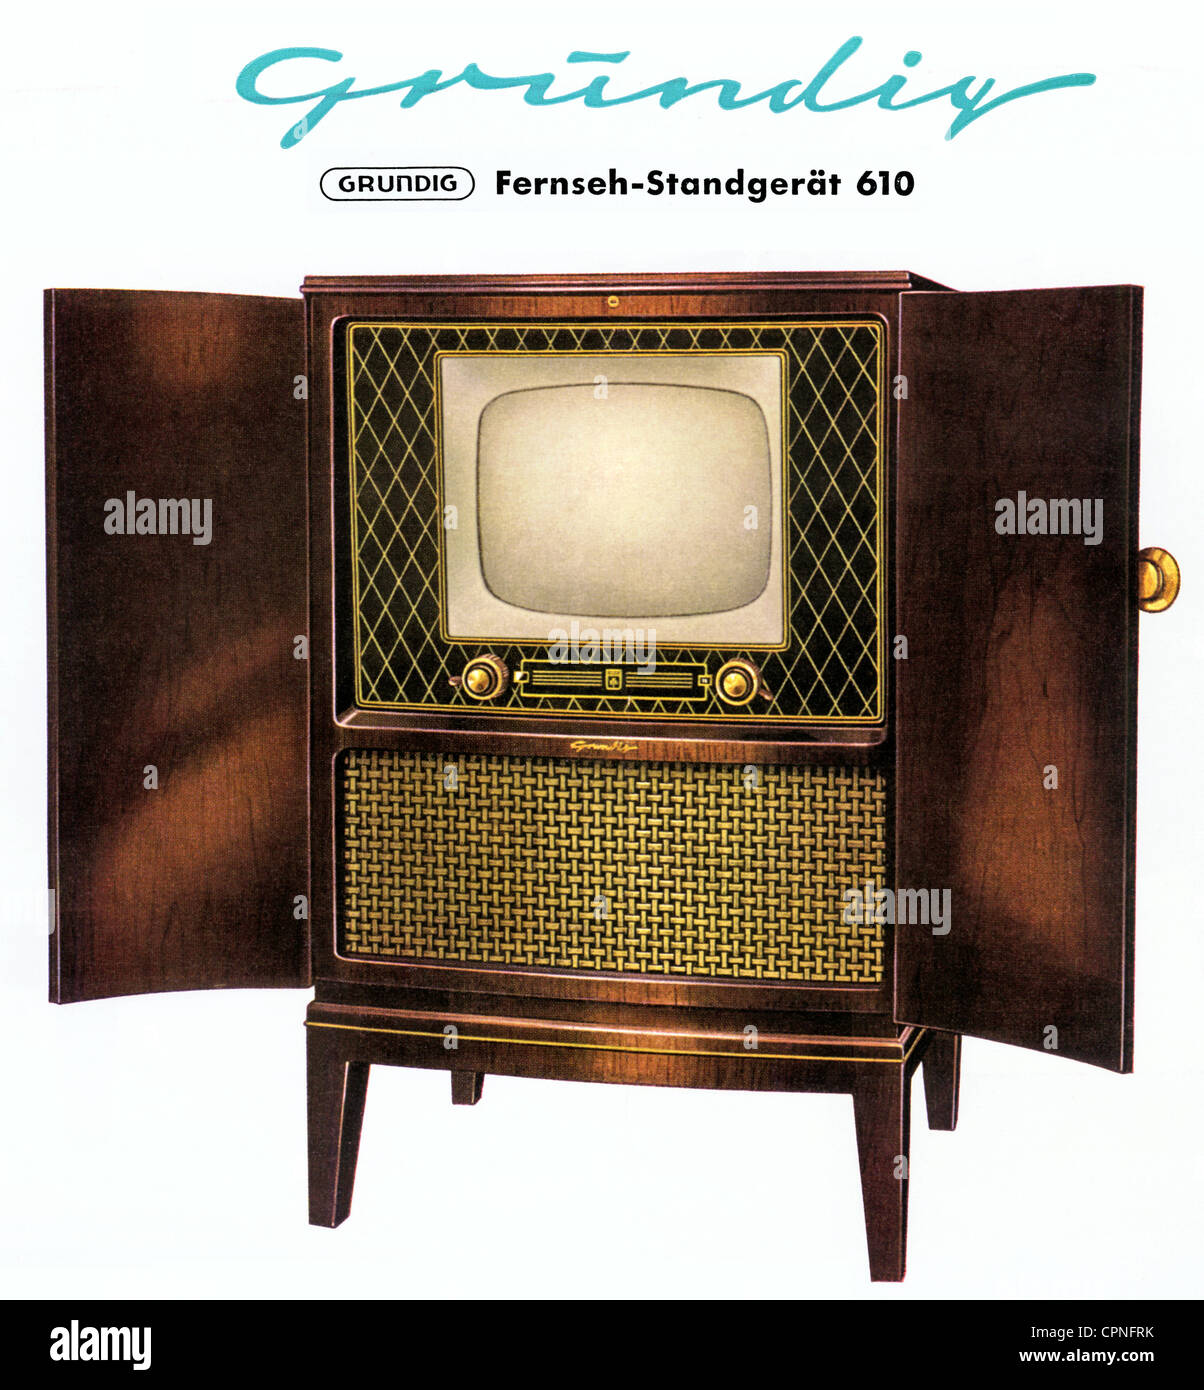 broadcast,television,television set,first Grundig television  console,standalone TV device 610,former retail price: DM 1680,chassis:  exotic woods,screen diagonal: 42 centimeter,cabinet with closeable  doors,Germany,1953,advertising,promotional leaflet ...